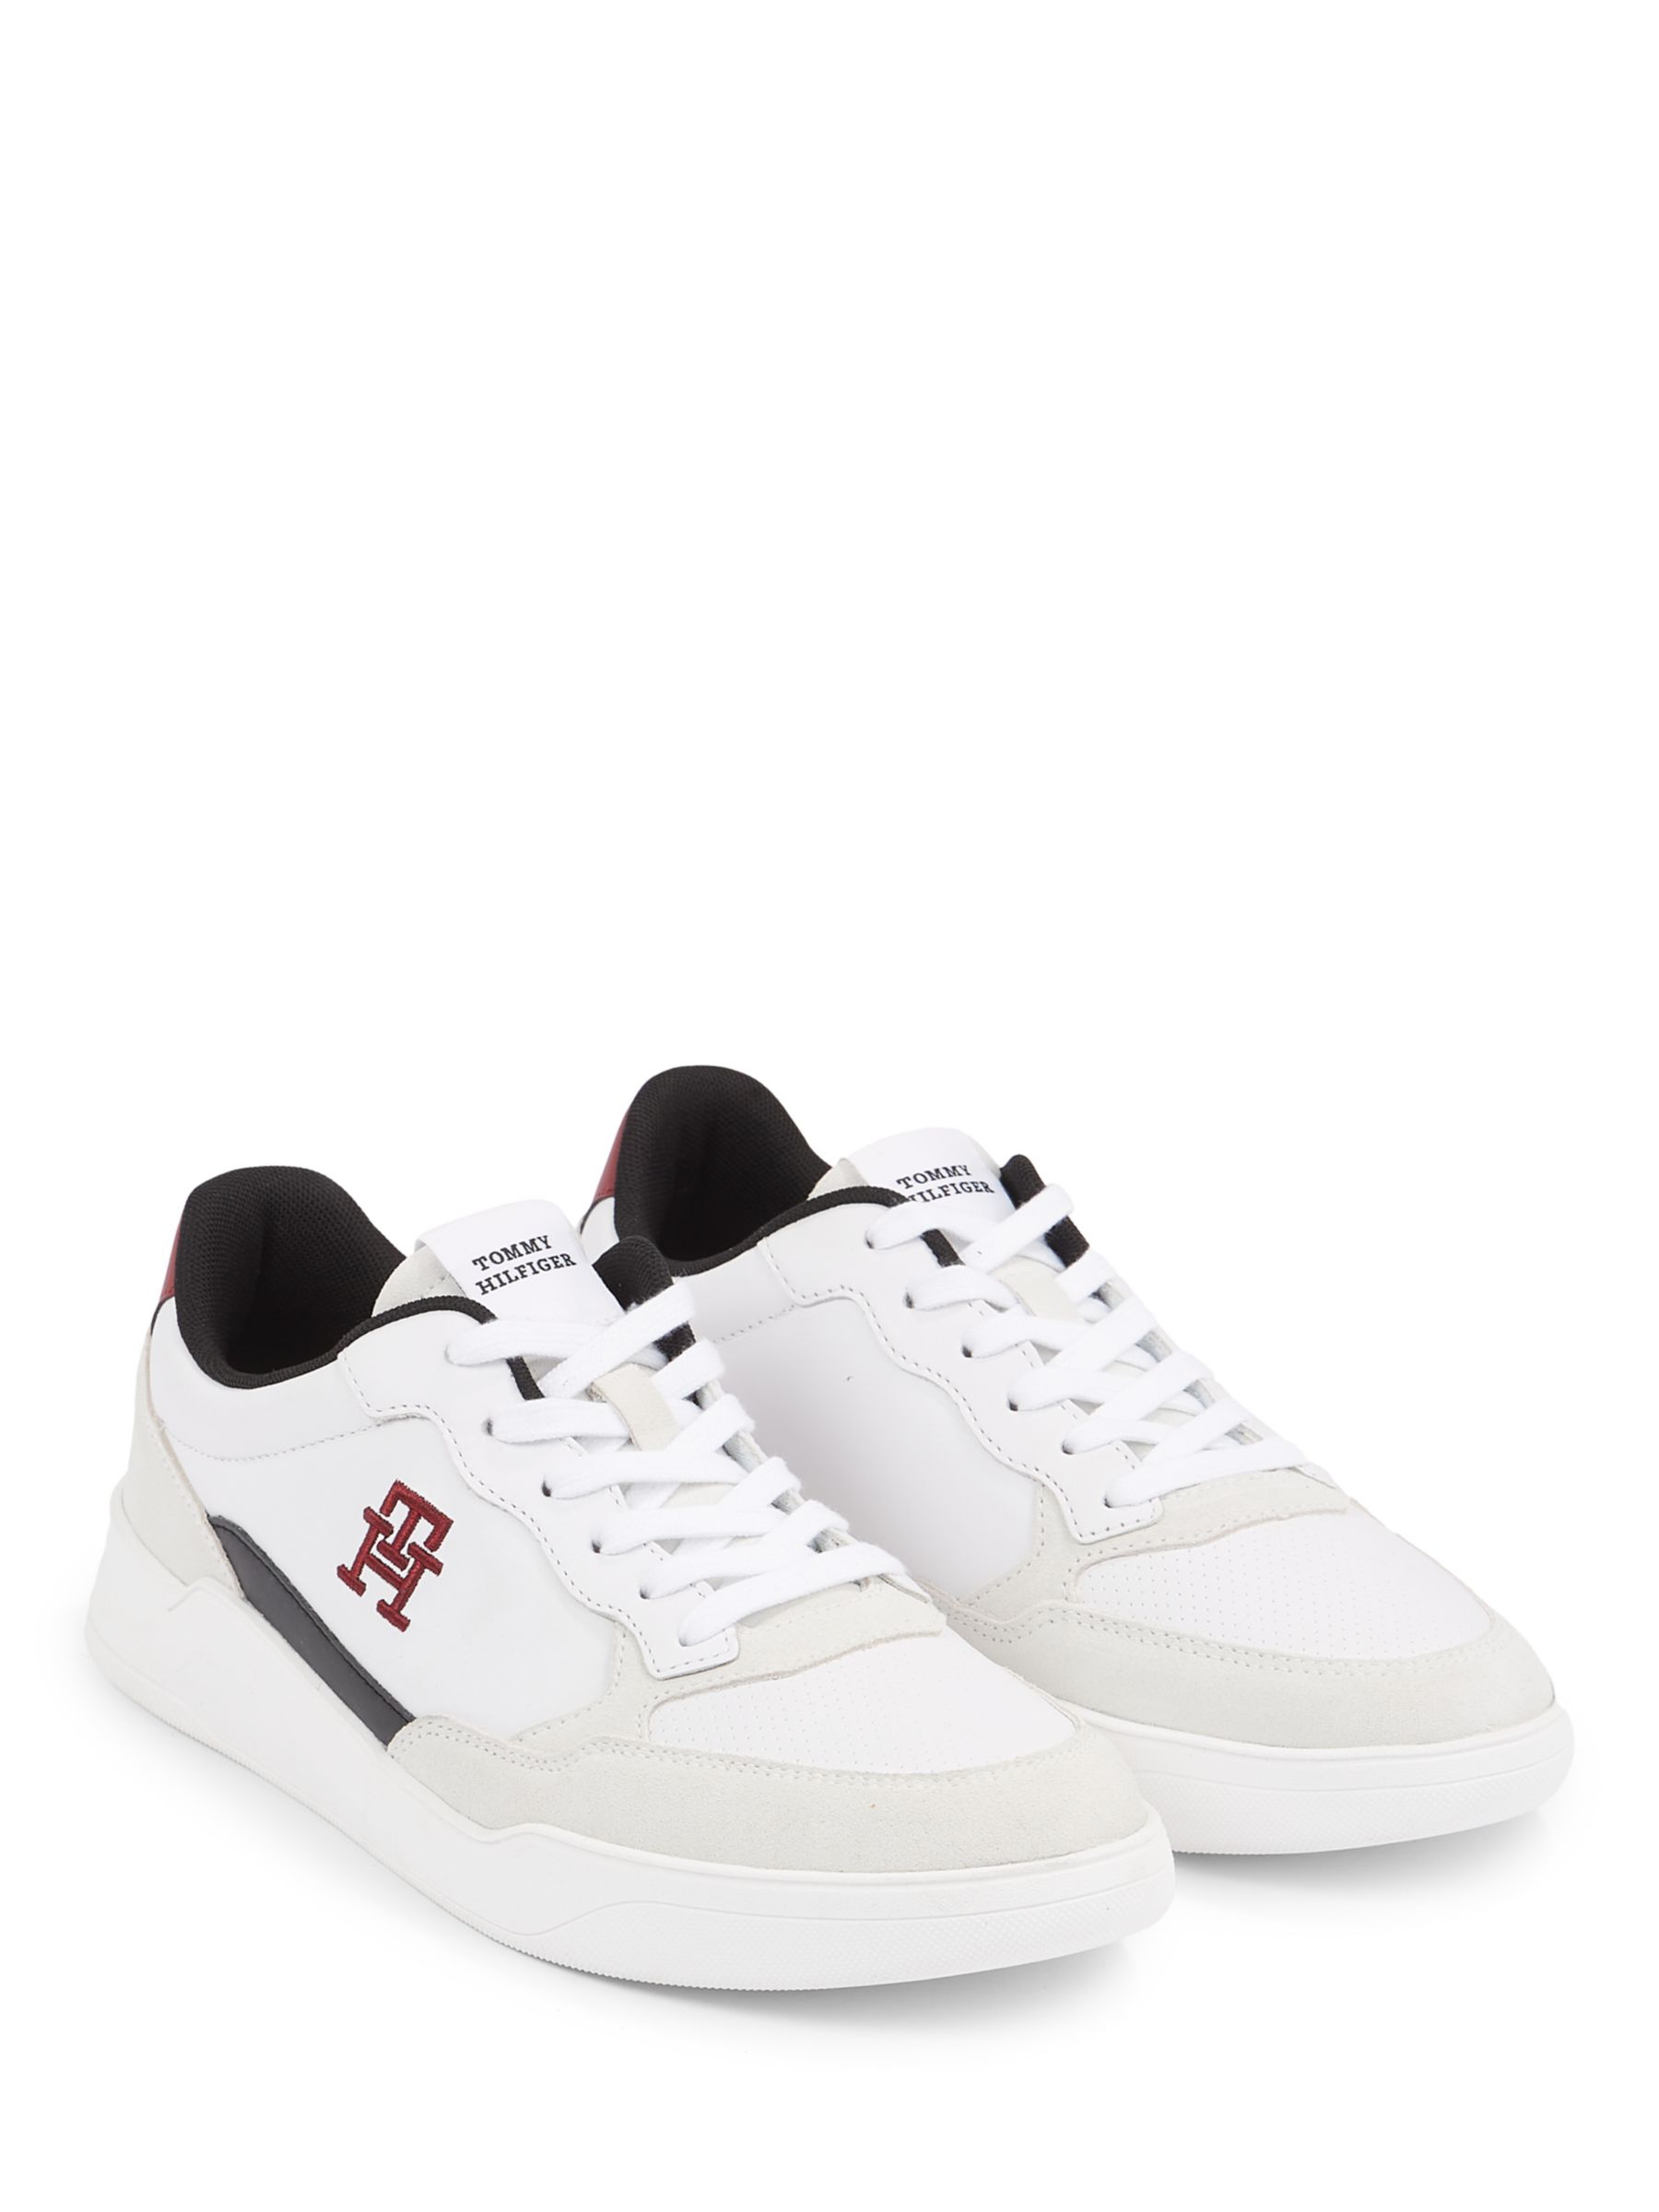 Tommy Hilfiger Elevated Cupsole Leather Trainers, White/Multi, EU41